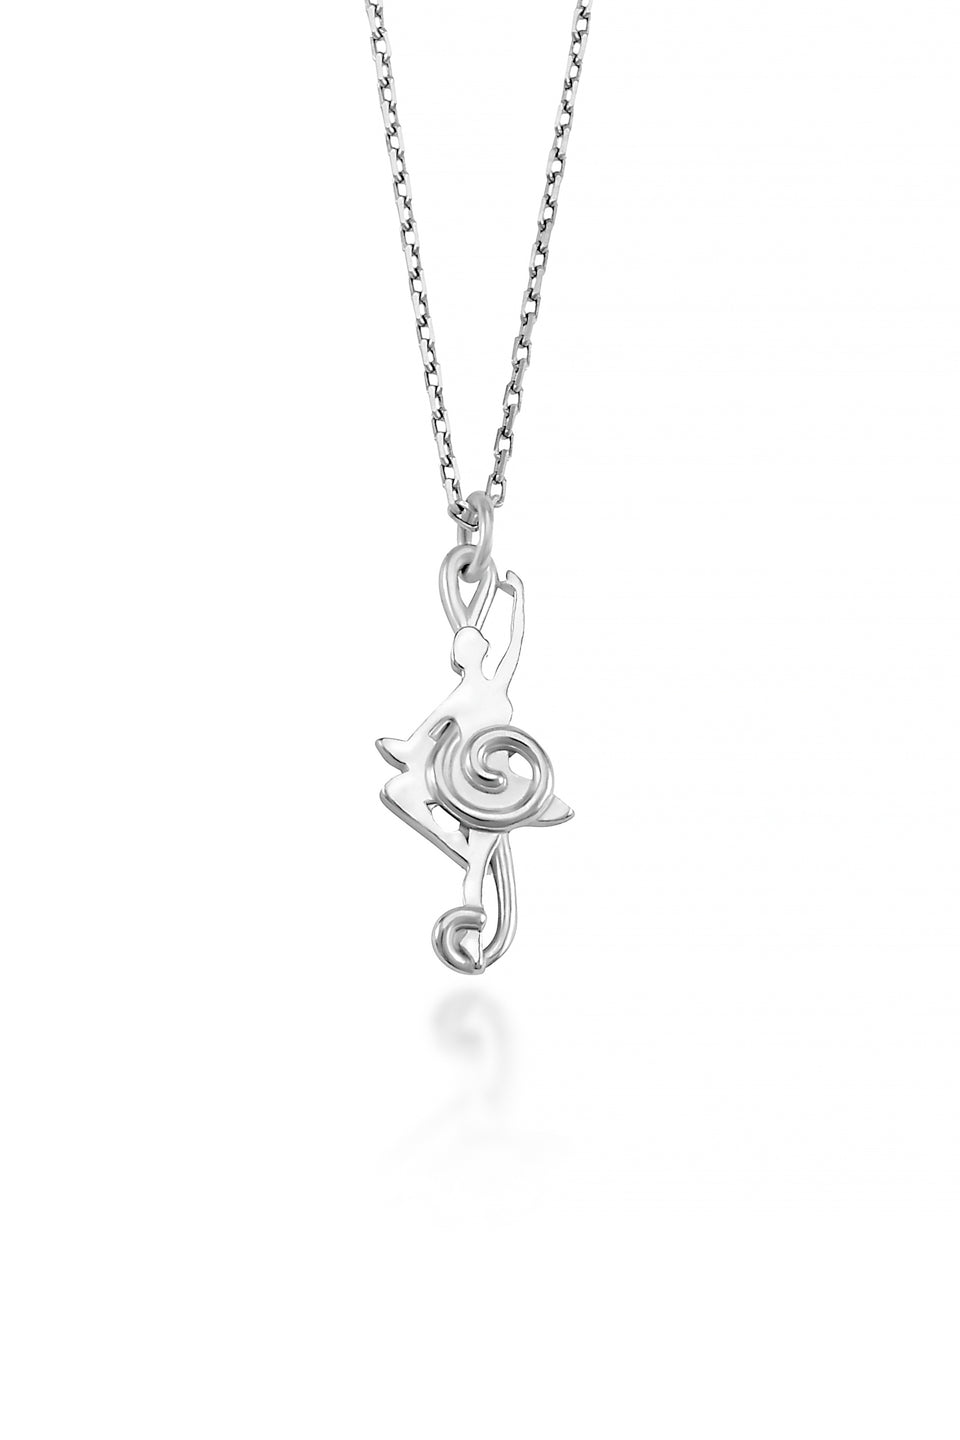 Balance Dancer Pendant ( 10 Karat white gold)- A ballerina is inset among the smooth curves of a treble clef in this unique piece of dancer jewelry.